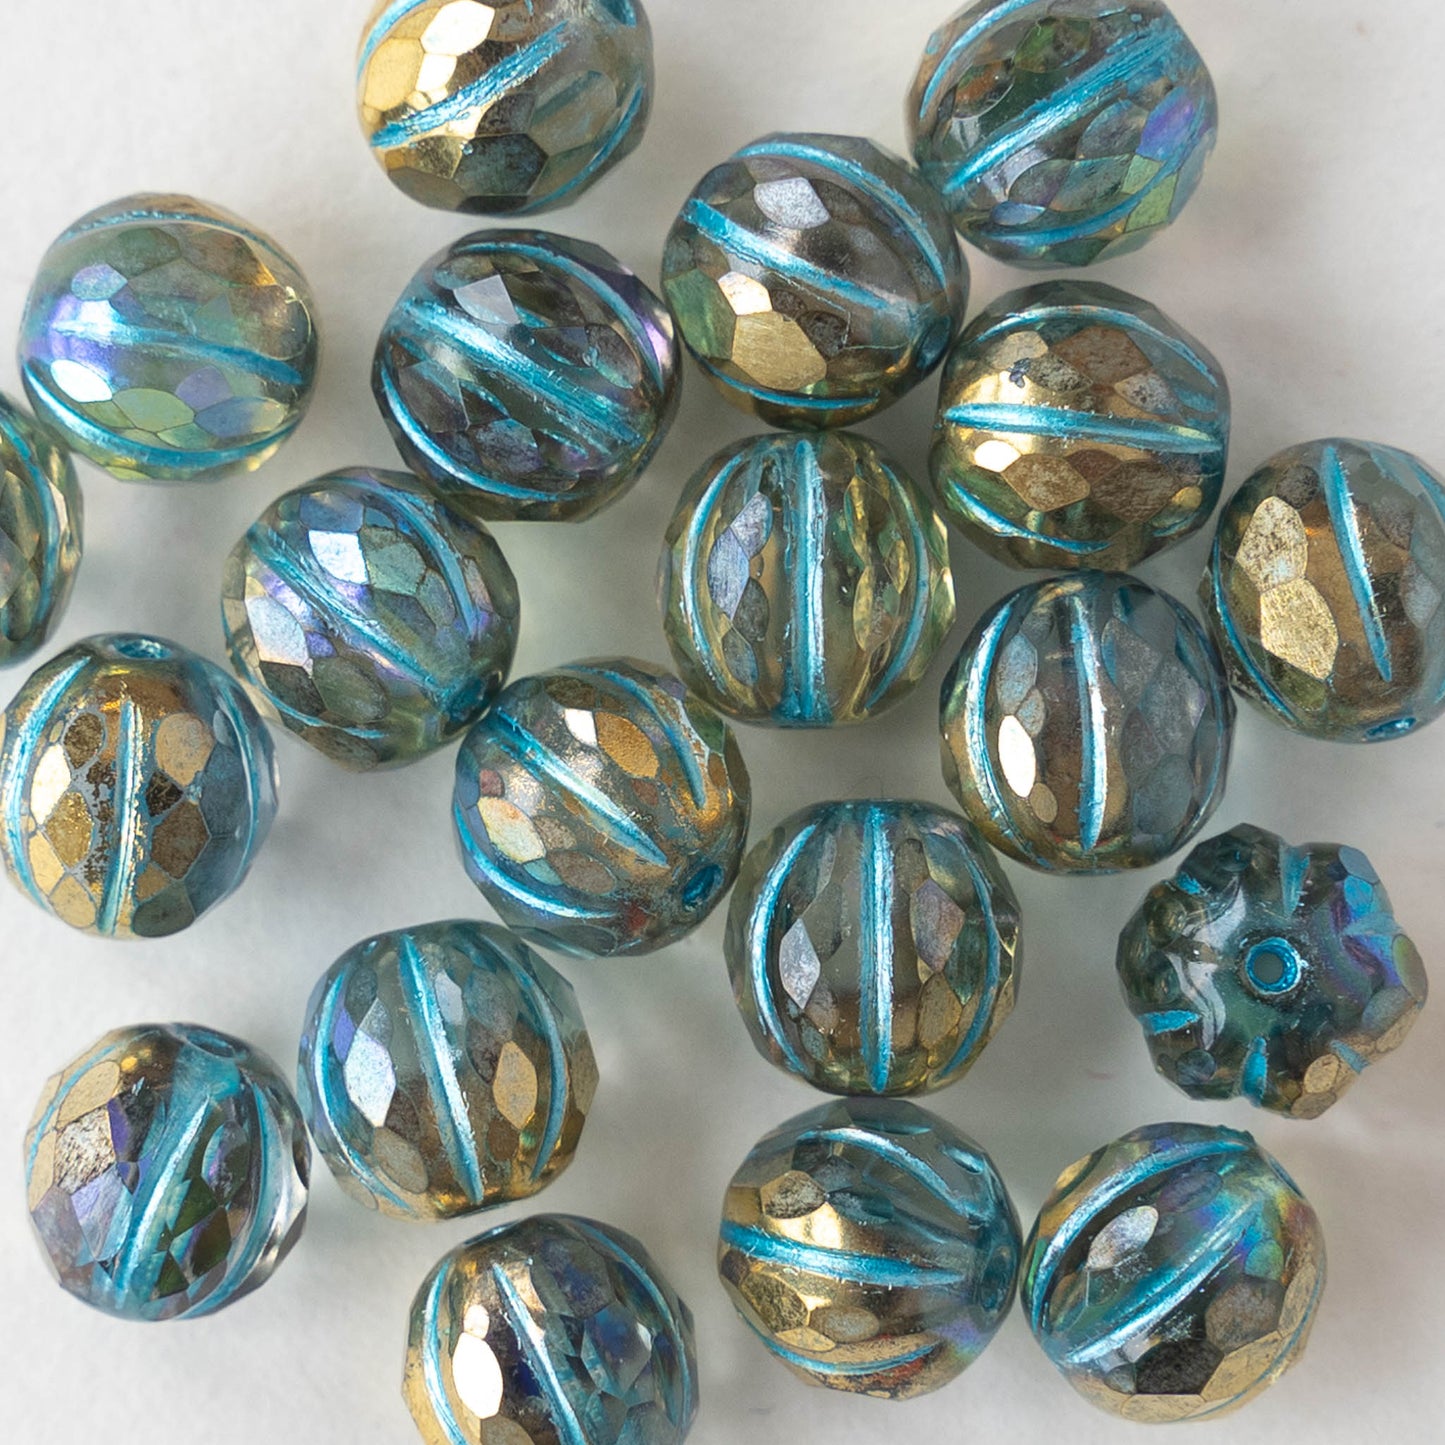 10mm Melon Beads for Jewelry Making Supply 10mm Round Beads Czech Glass  Beads Fluted Glass Beads Seafoam Amber Luster AB 